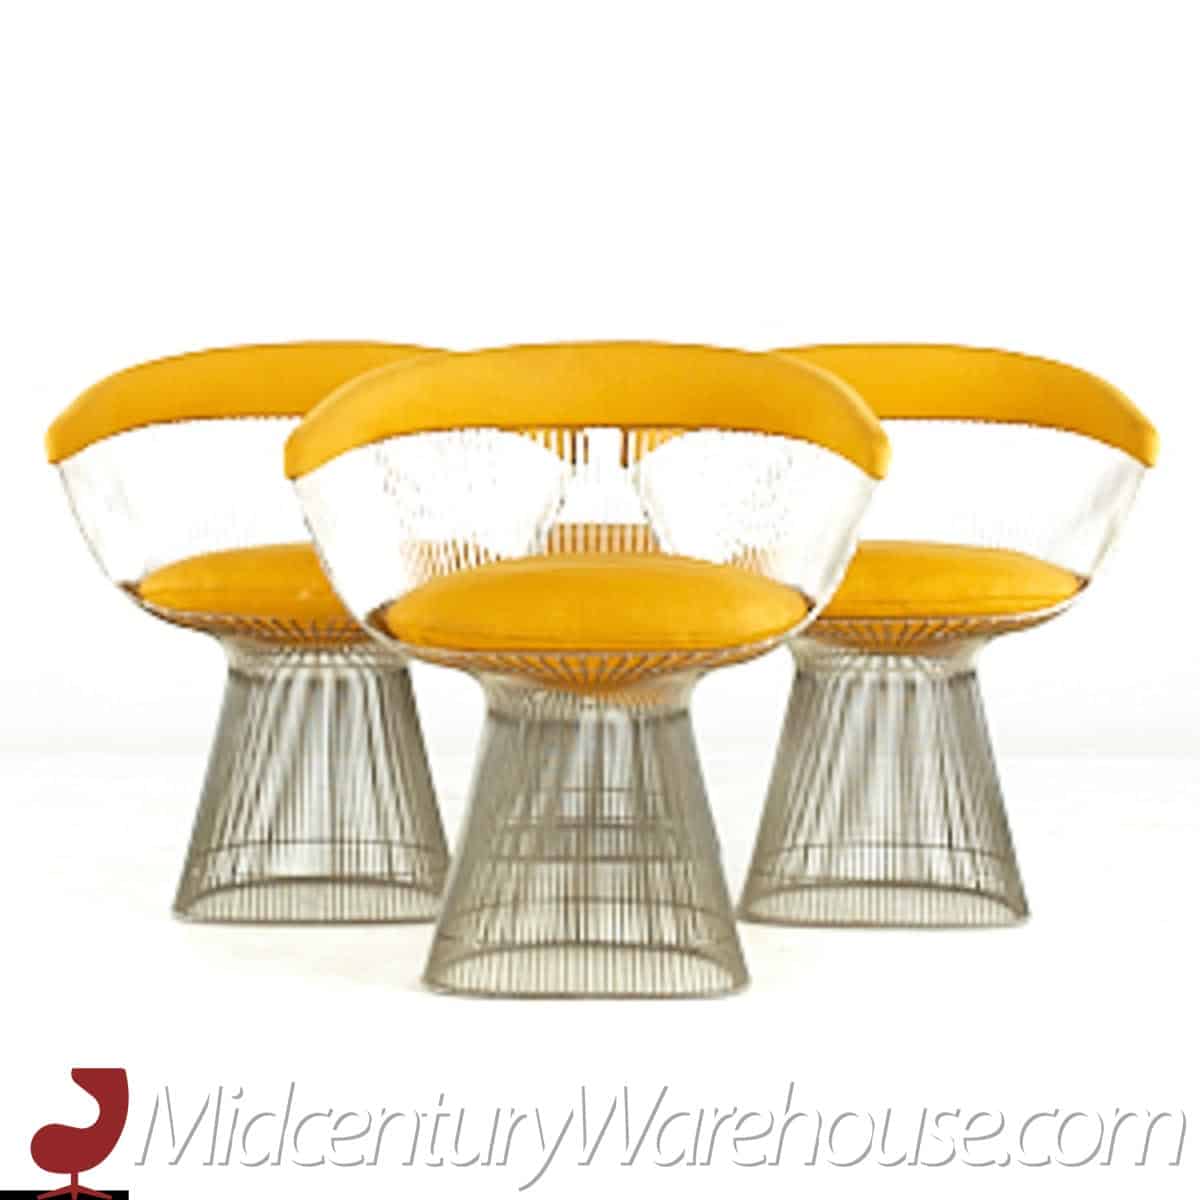 Warren Platner for Knoll Mid Century Chairs - Set of 4